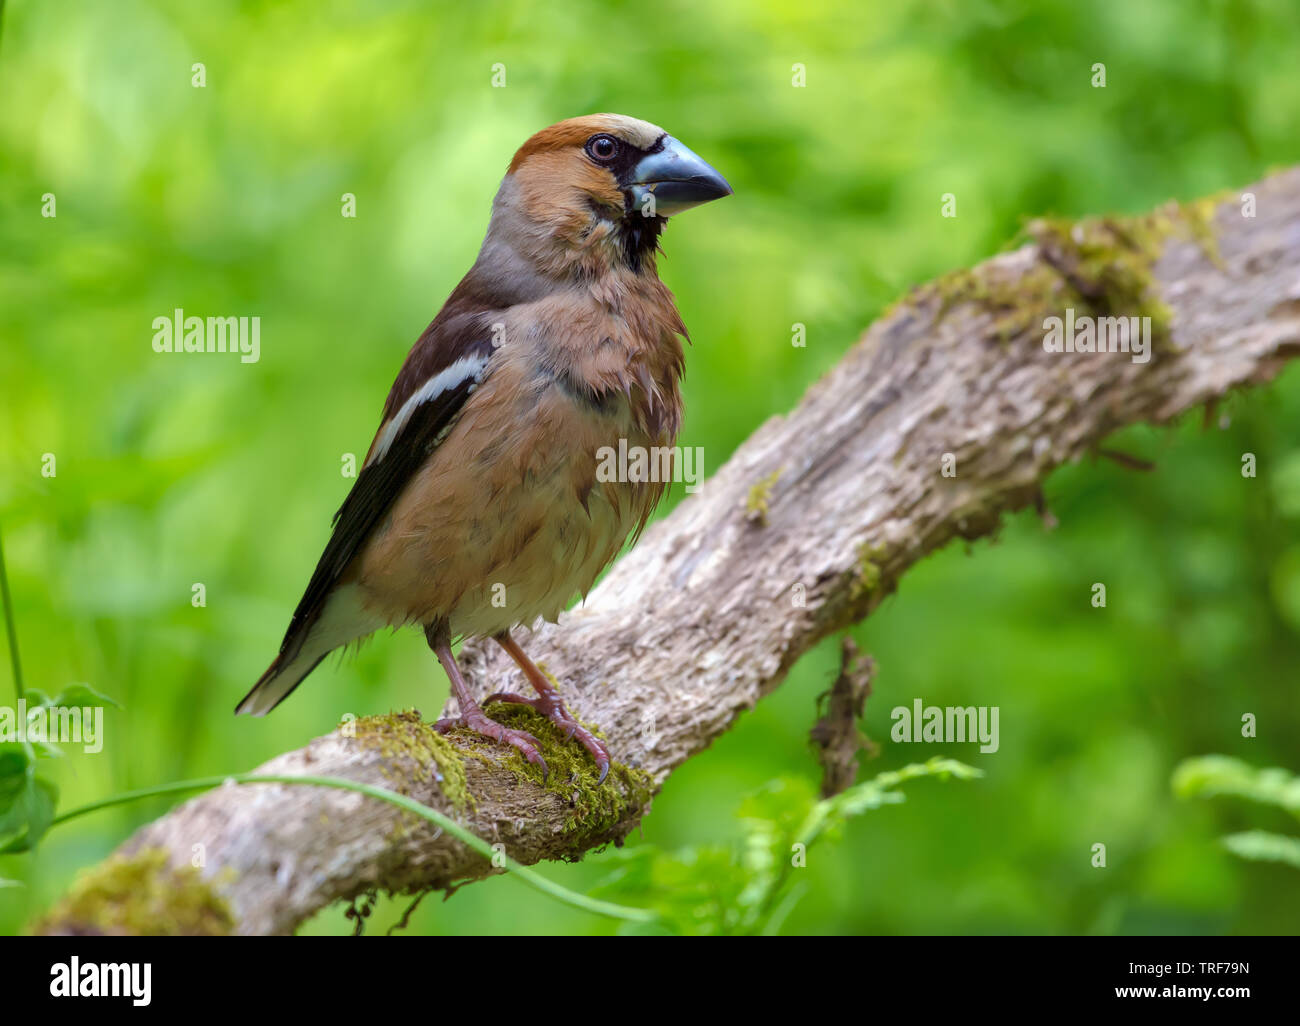 A bit wet Male hawfinch perched on a dry aged mossy branch in forest Stock Photo